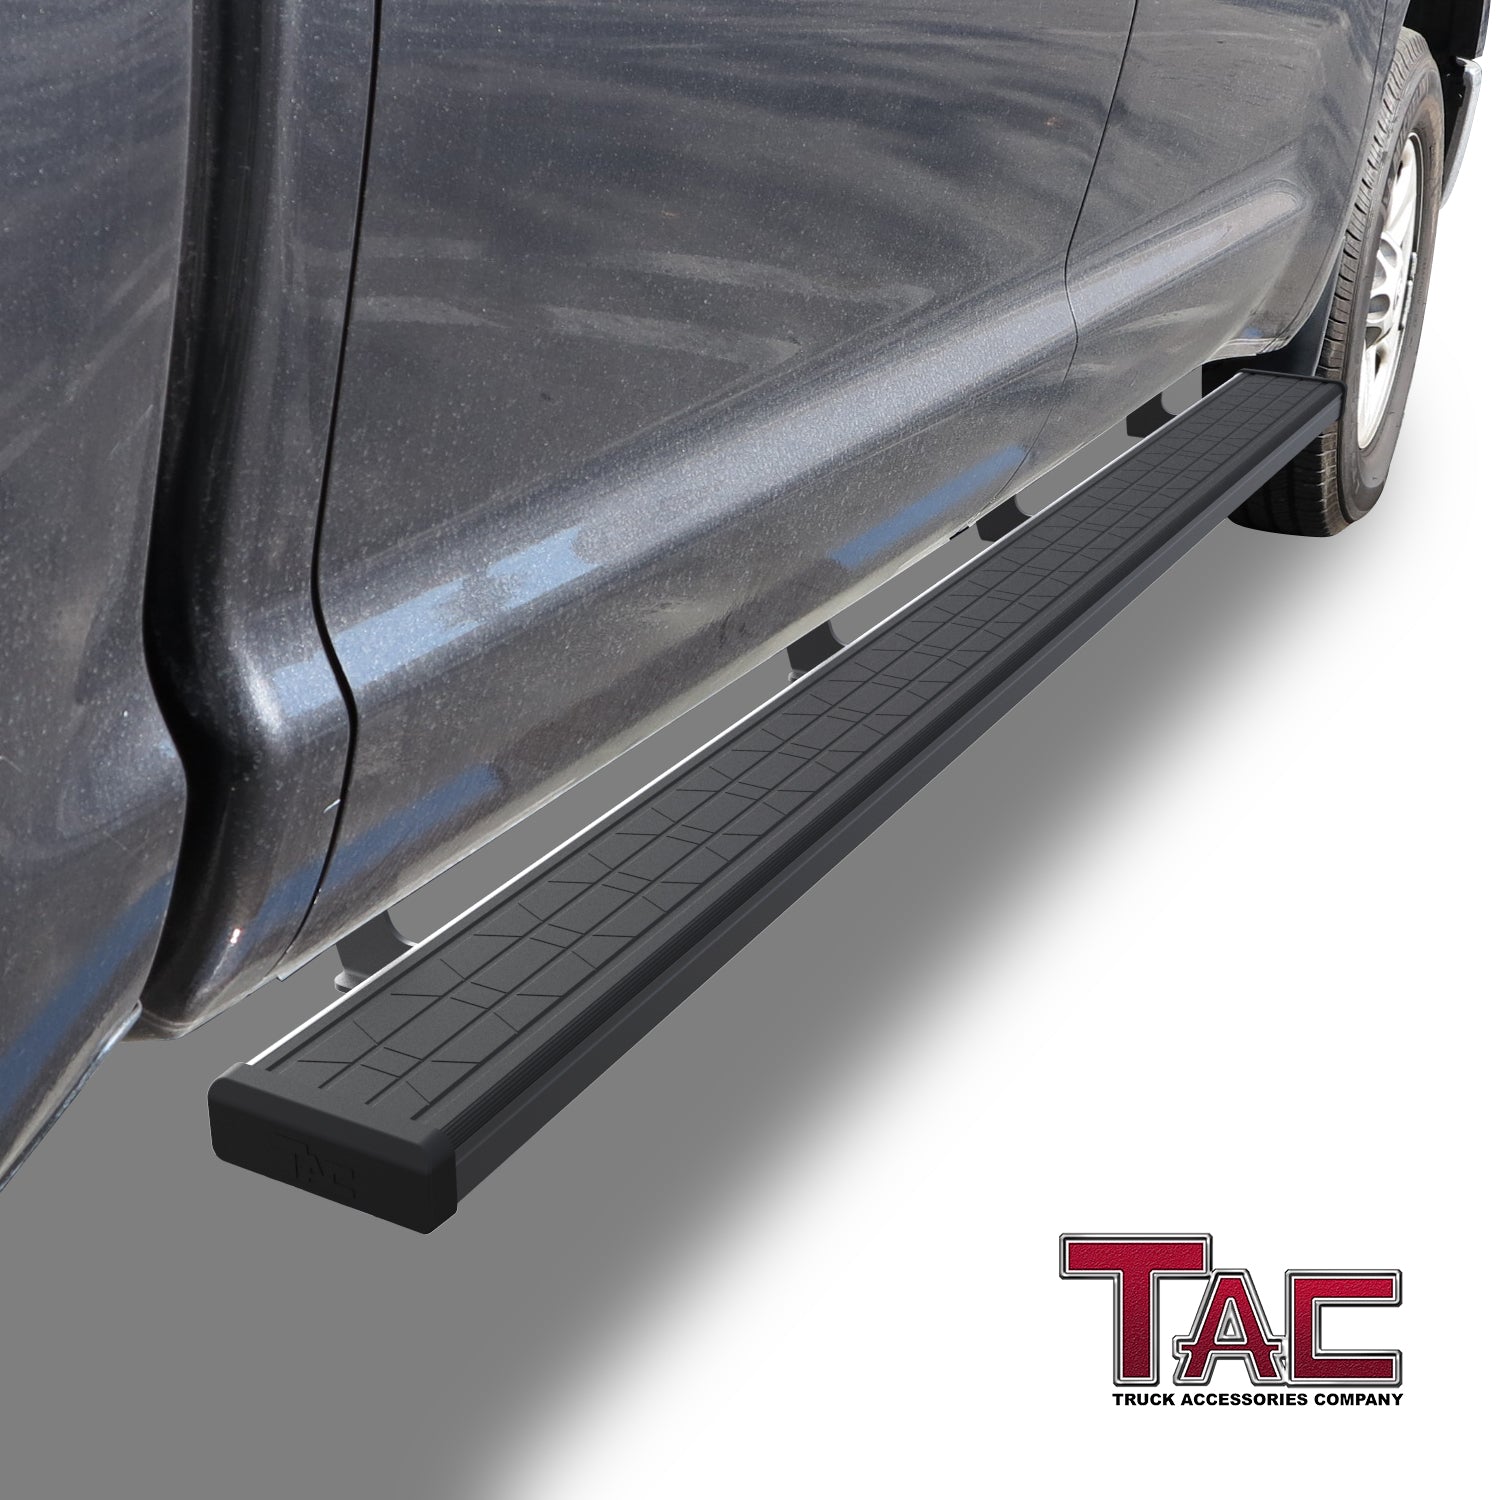 TAC Spear Running Boards Compatible with 2007-2021 Toyota Tundra CrewMax 6" Side Step Rail Nerf Bar Truck Accessories Aluminum Texture Black Width Body and Soft top Lightweight 2Pcs - 0